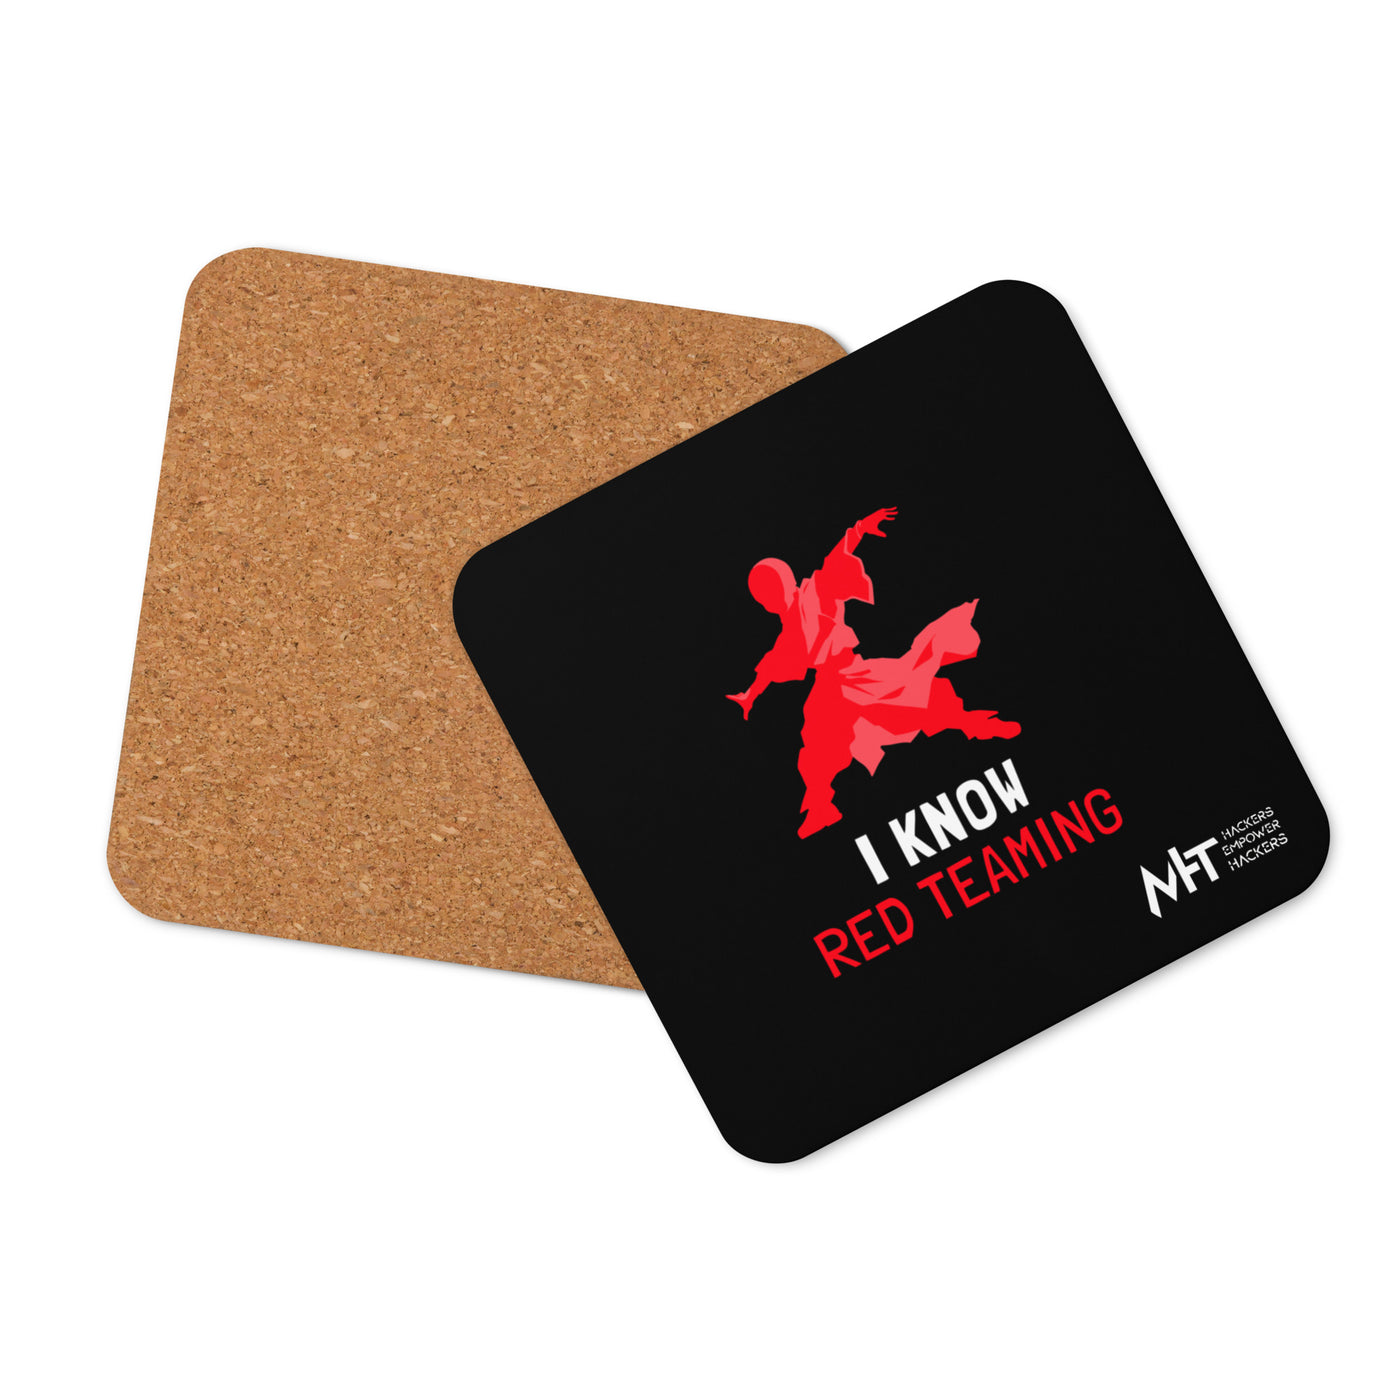 I Know Red Teaming - Cork-back coaster